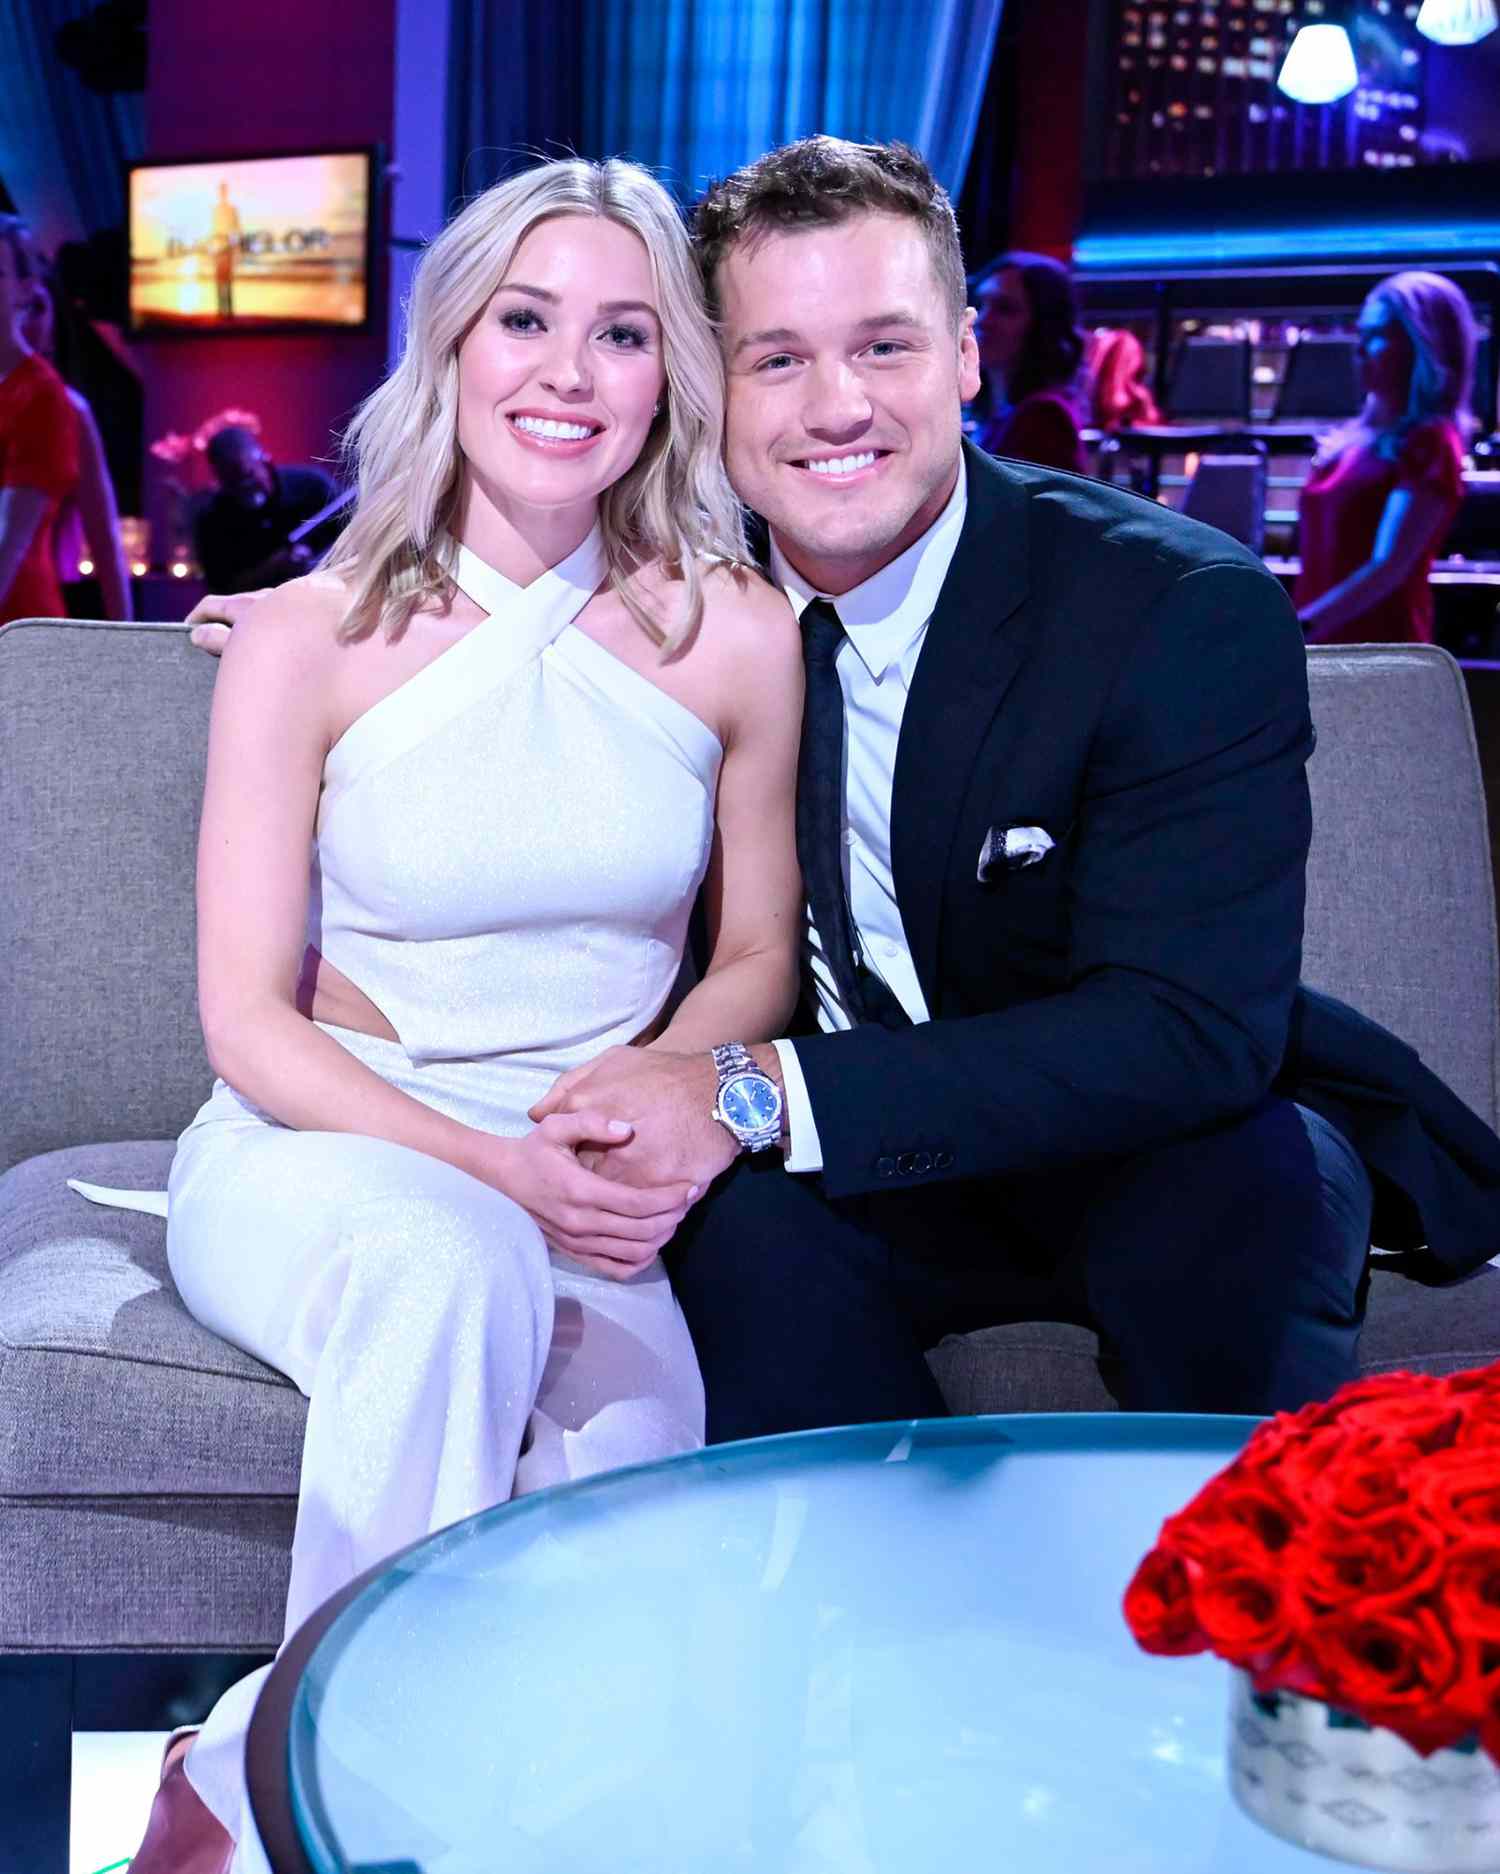 Are any of the bachelor couples still married?